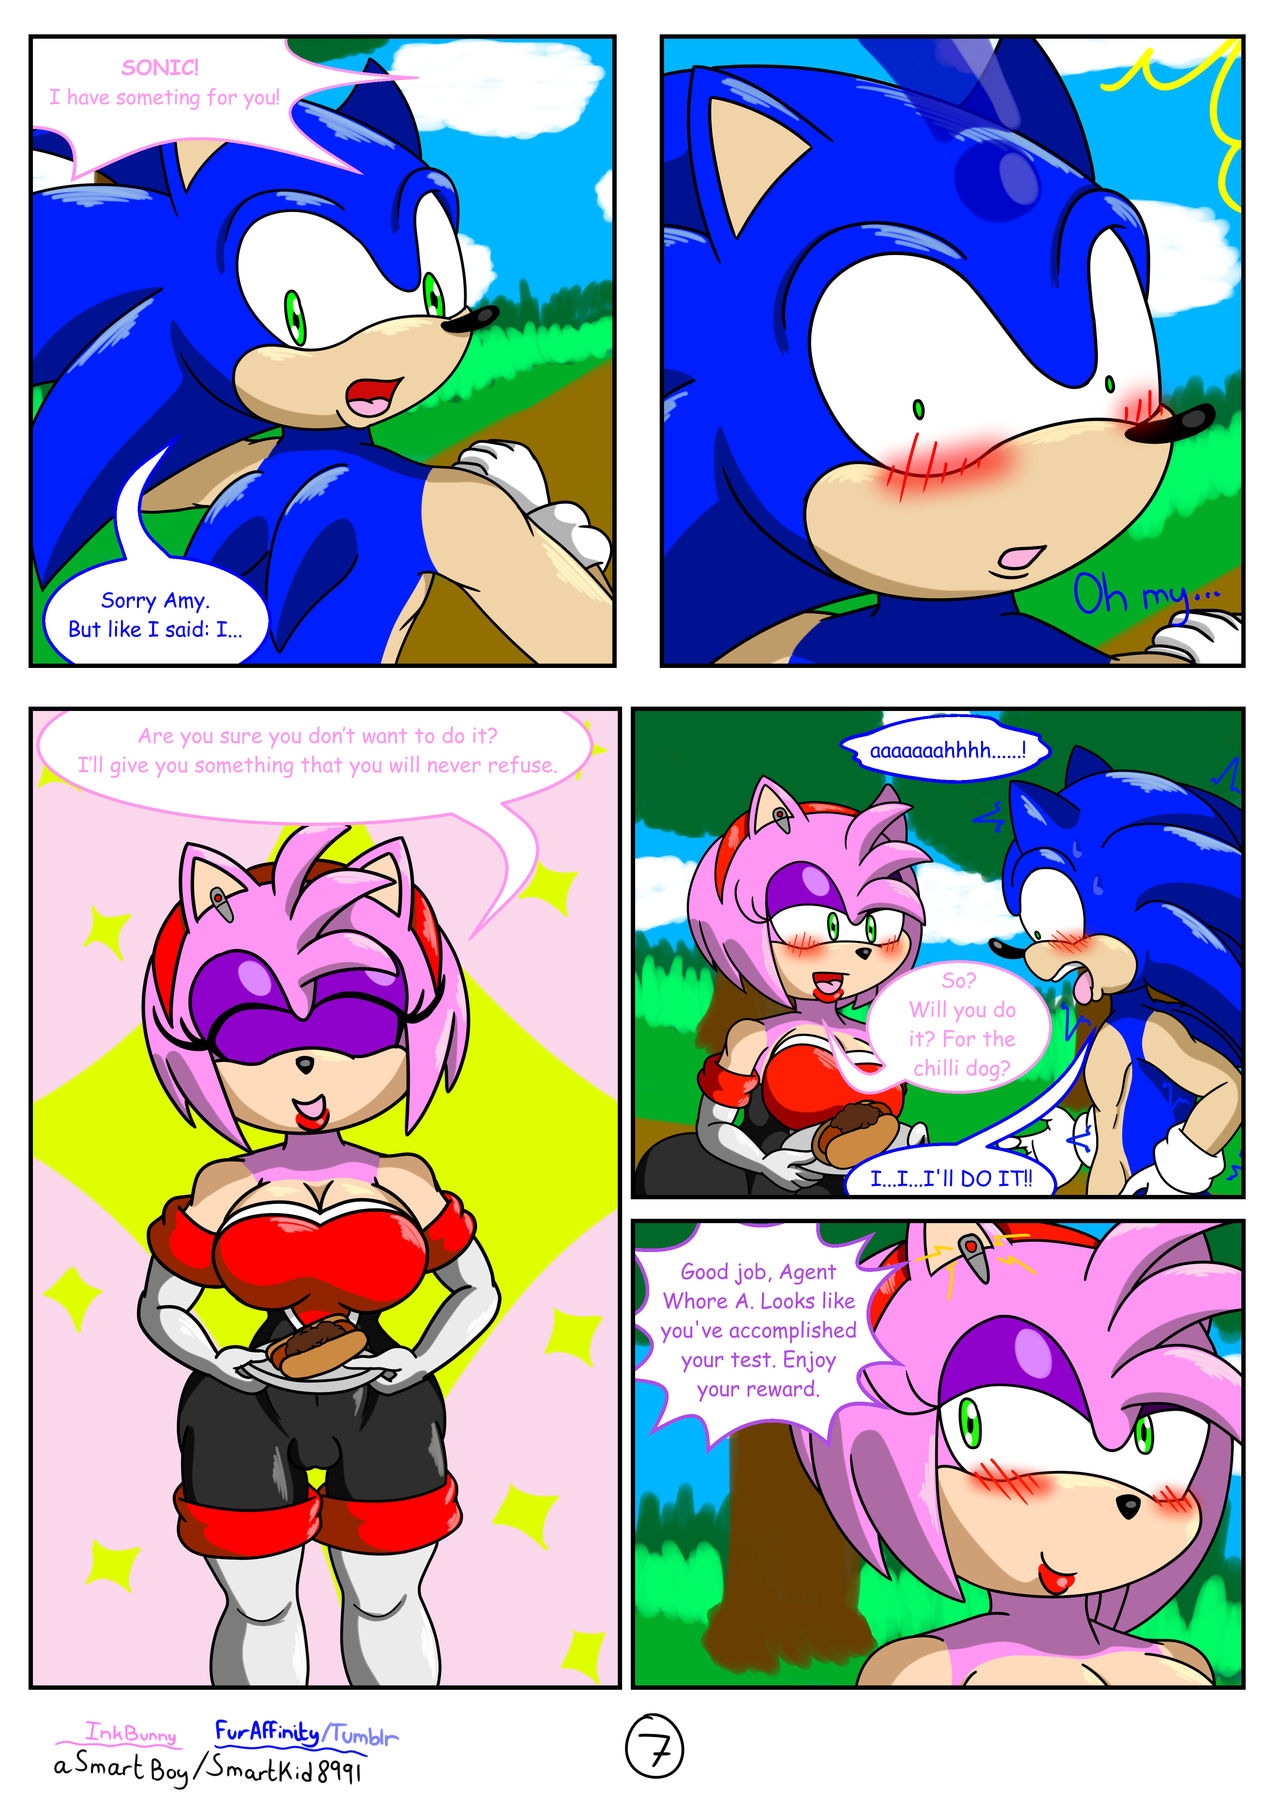 [SmartKid8991] Agent Whore Bootcamp (Sonic The Hedgehog) [Ongoing] 7